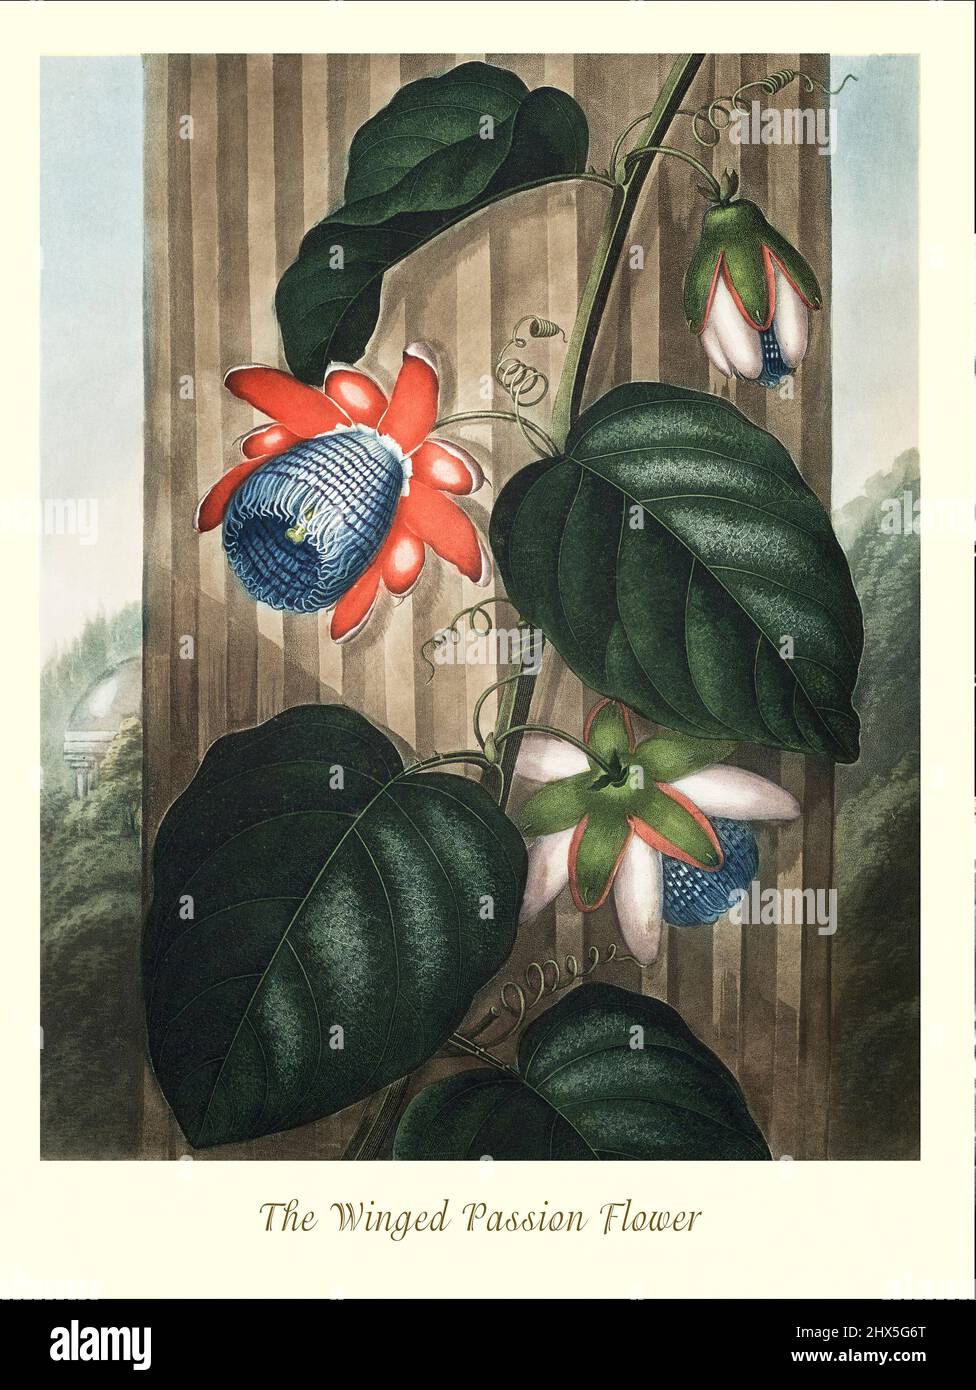 An early 19th century illustration of the Winged Passion Flower in the Genus Passiflora and Family Passifloraceae, a genus of about 550 species of flowering plants, mostly tendril-bearing vines, with some being shrubs or trees. They can be woody or herbaceous. Passion flowers produce regular and usually showy flowers with a distinctive corona. The flower is pentamerous and ripens into an indehiscent fruit with numerous seeds. This artwork for Robert John Thornton's 'The Temple of Flora' in 1807, was printed, for the publisher, by T. Bensley, London, England. Stock Photo